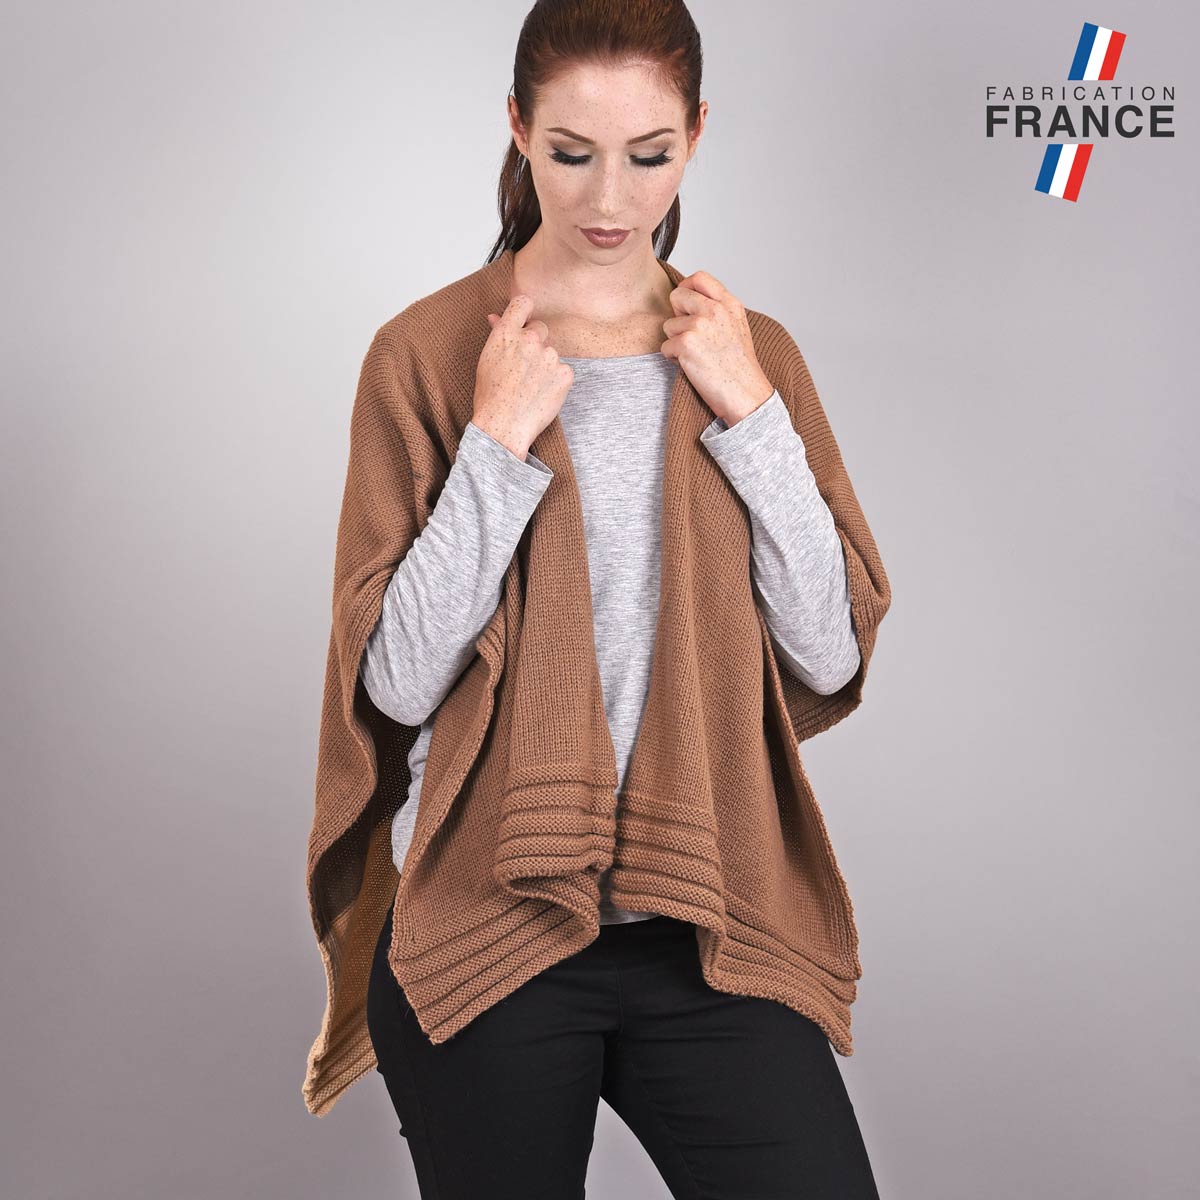 Poncho-femme-taupe-creme-fabrication-francaise-AT-03197